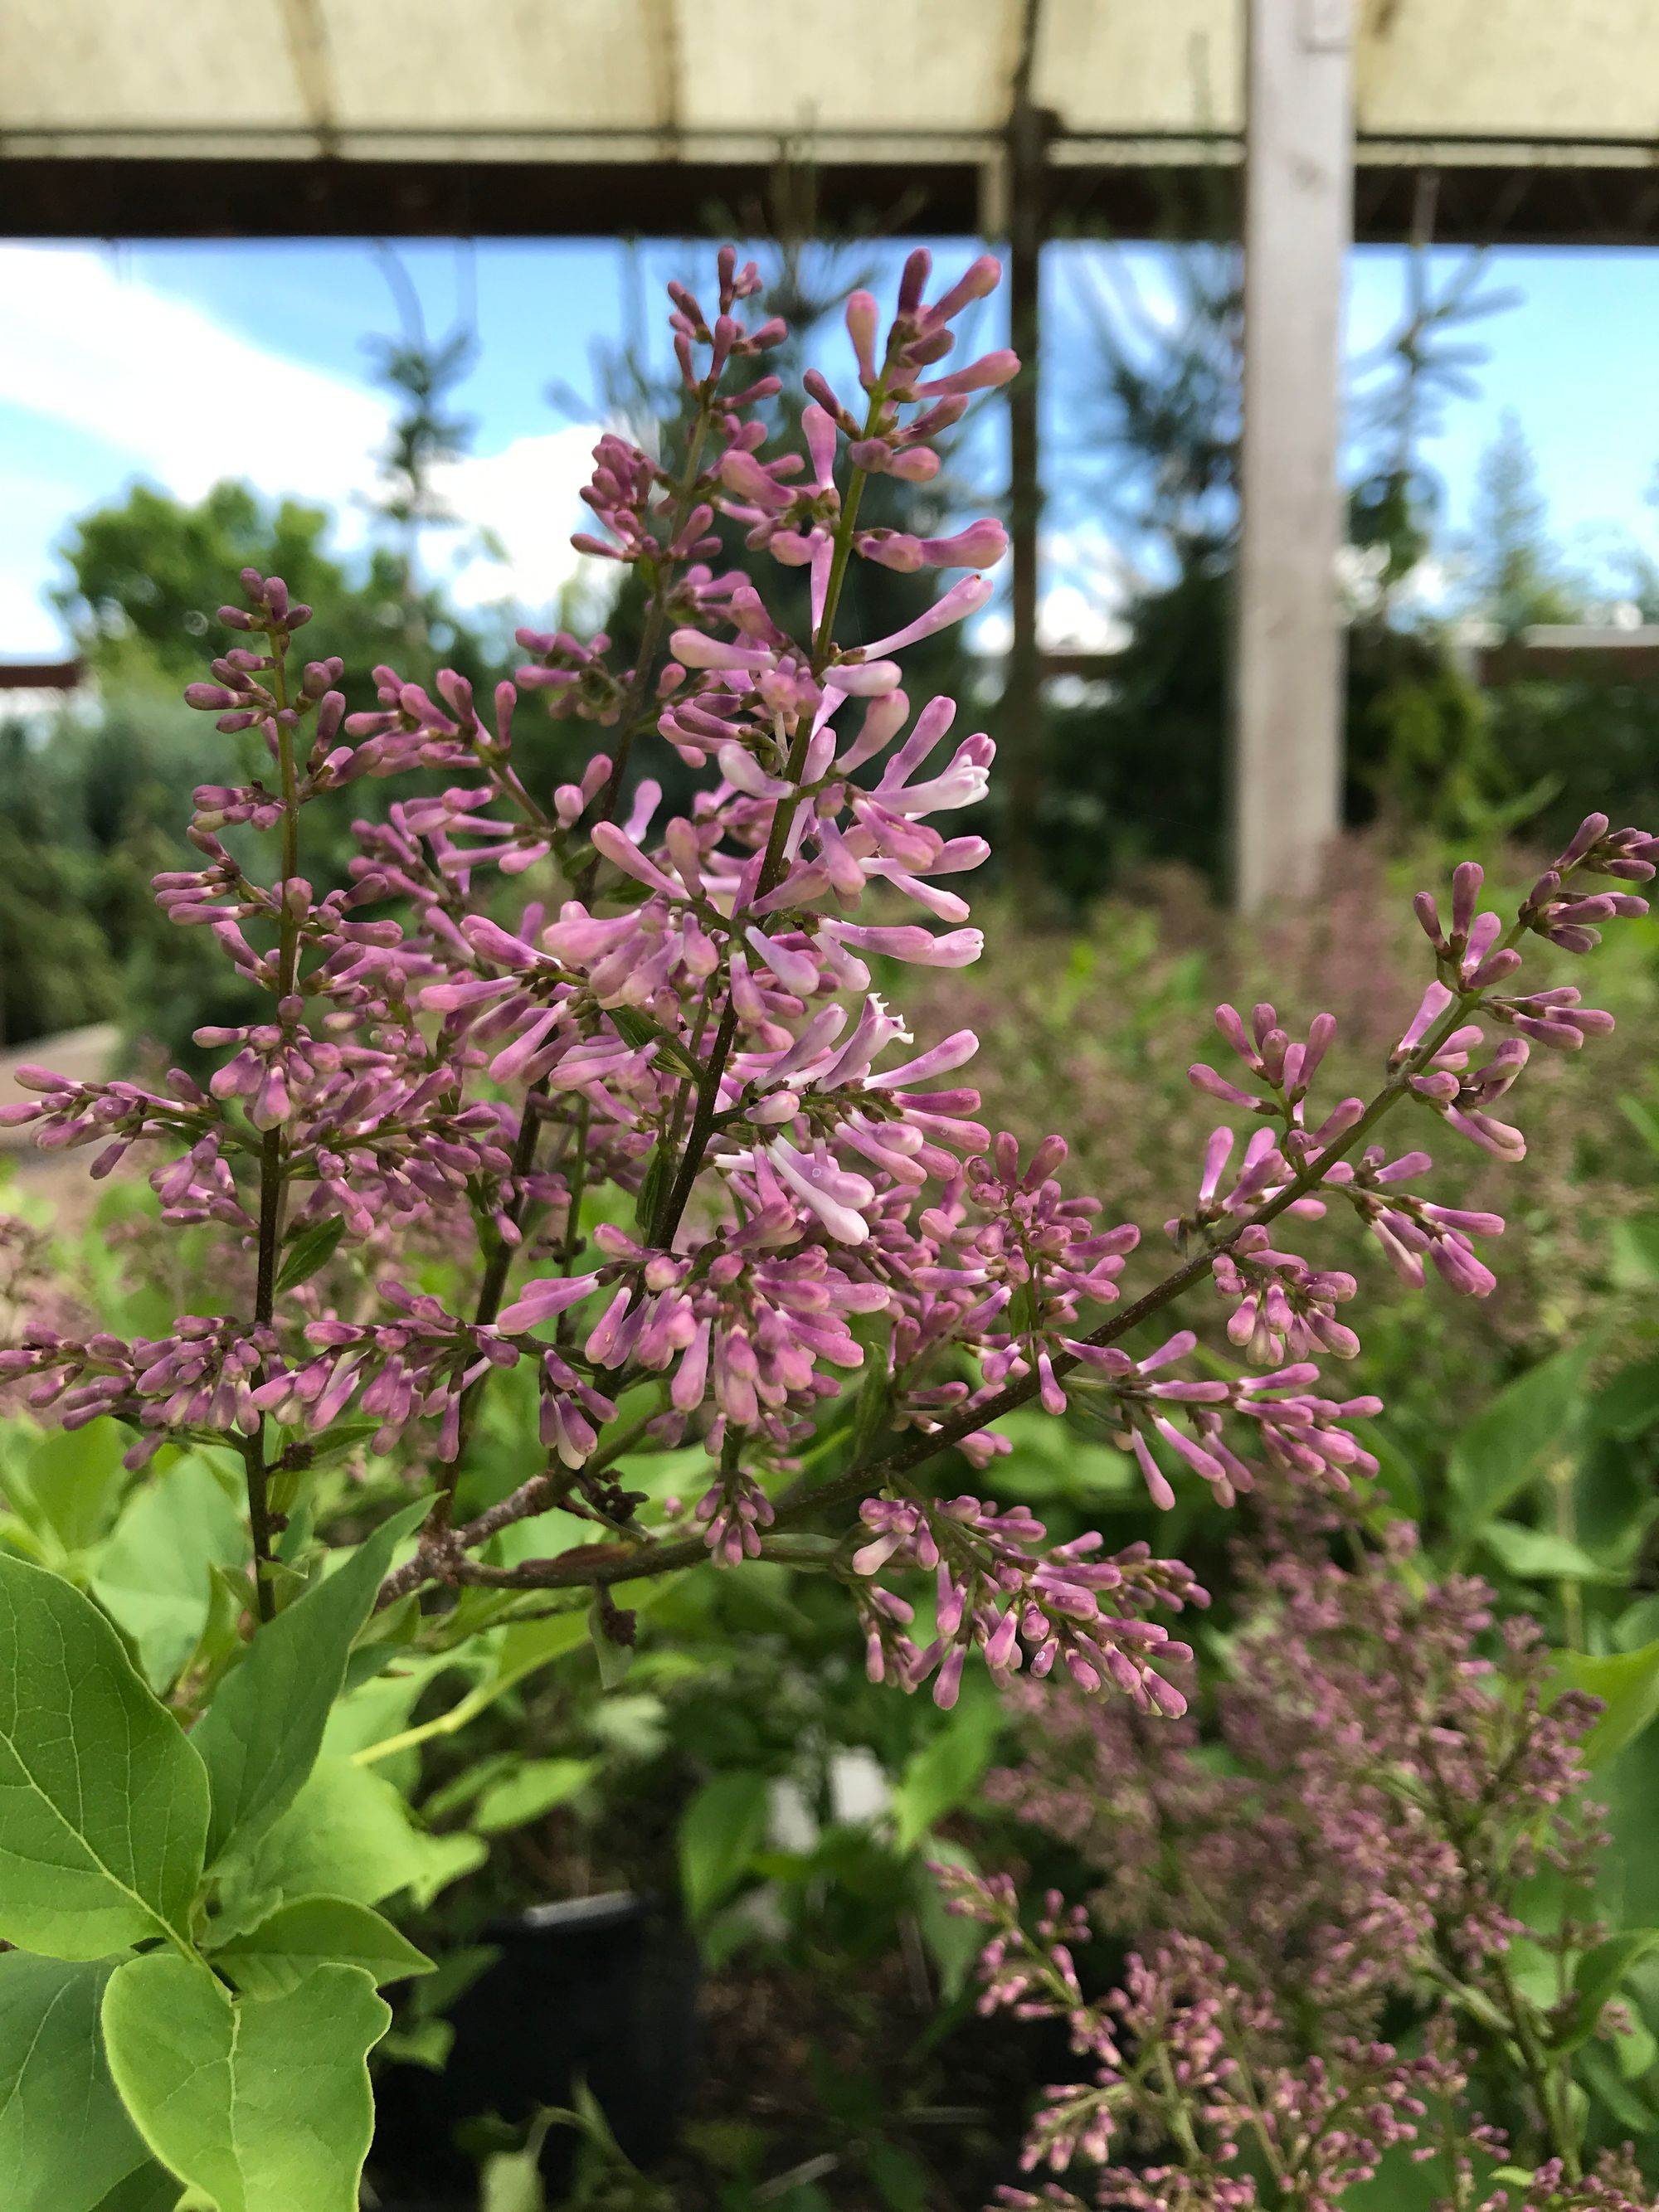 Three Great Lilacs for Your Garden: Miss Kim, Bloomerang and Dwarf Korean